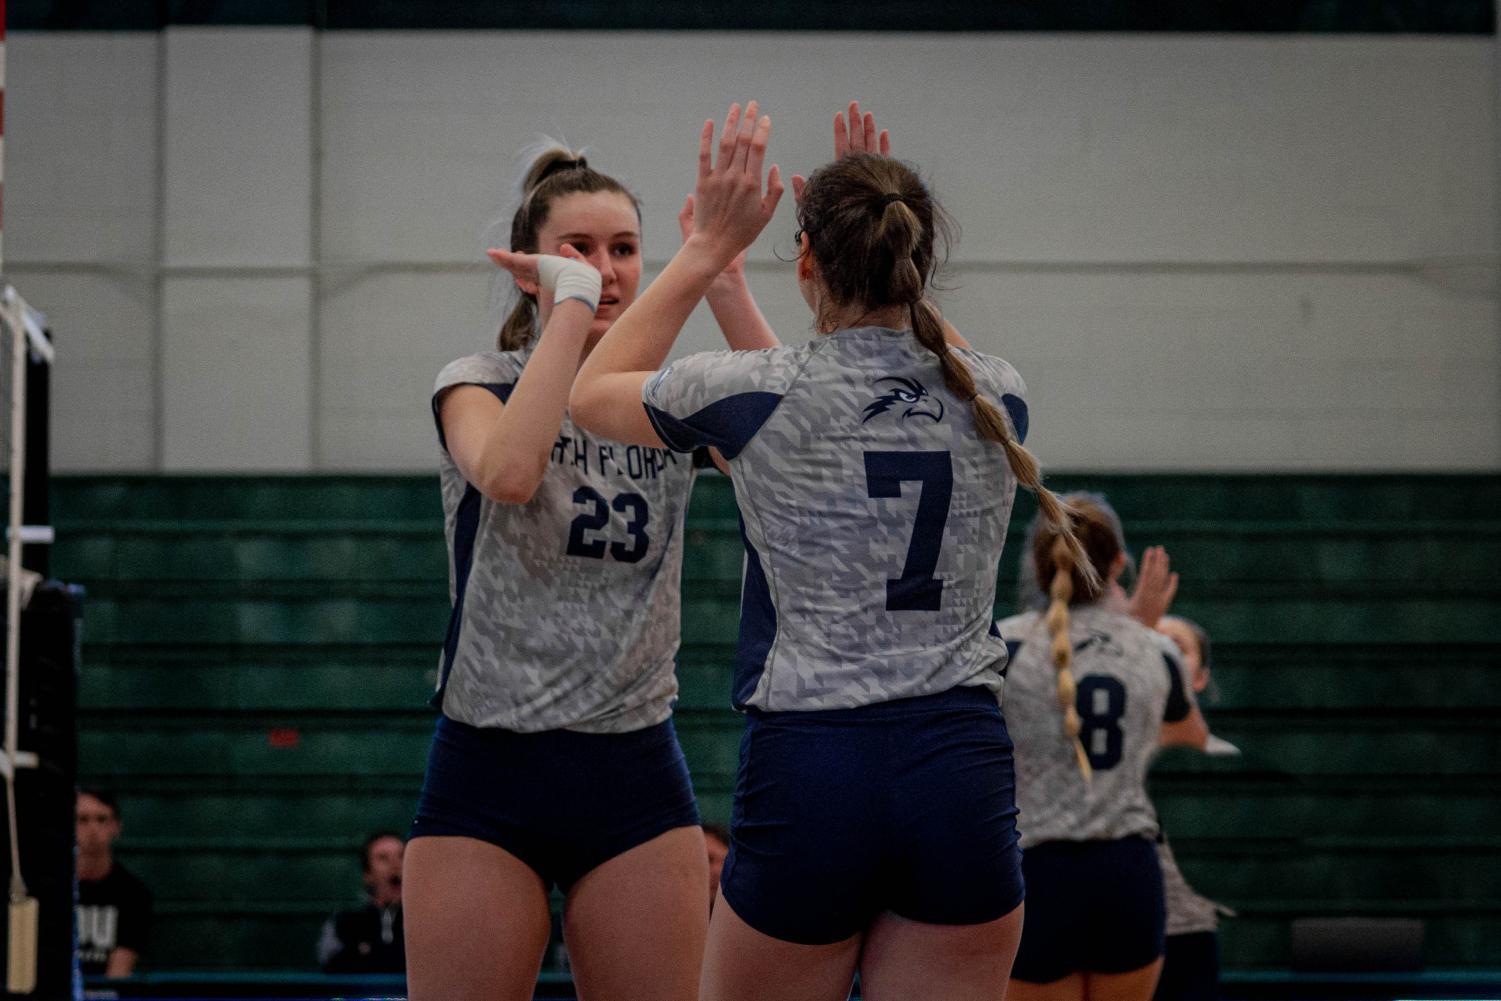 Volleyball players high-five